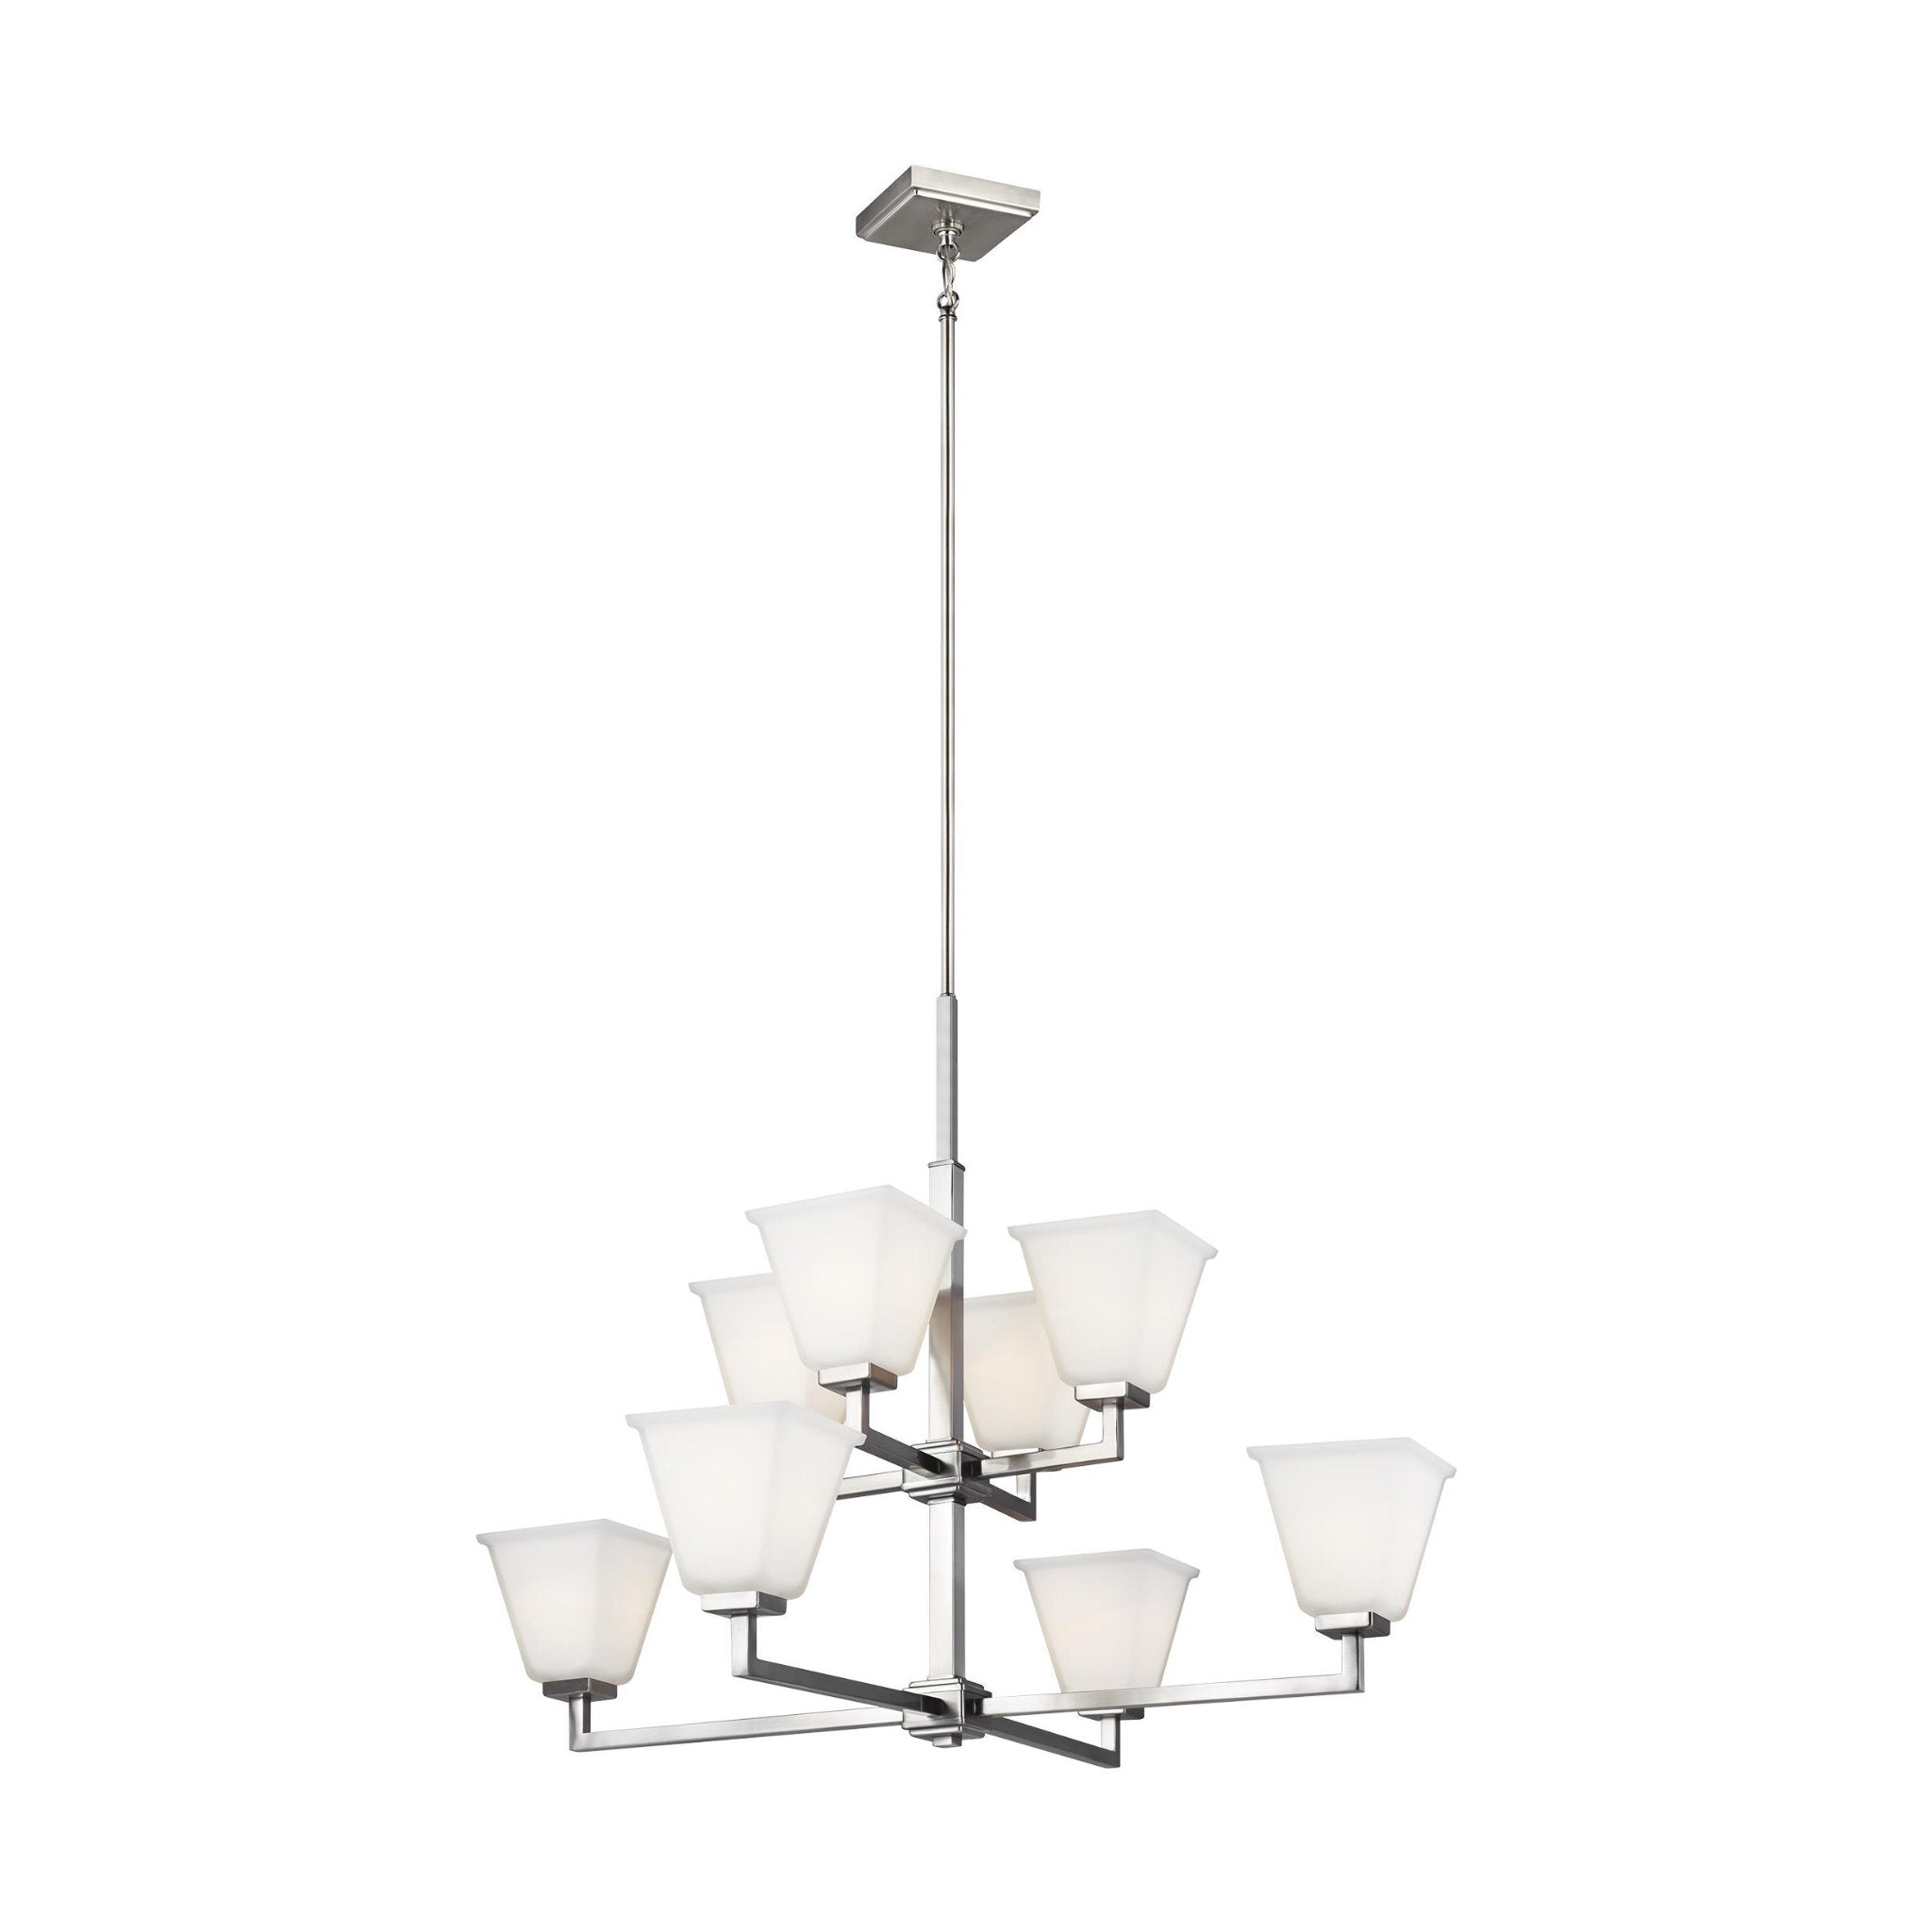 Ellis Harper Eight Light Chandelier Transitional 35.5" Width 27.75" Height Steel Square Etched / White Inside Shade in Brushed Nickel